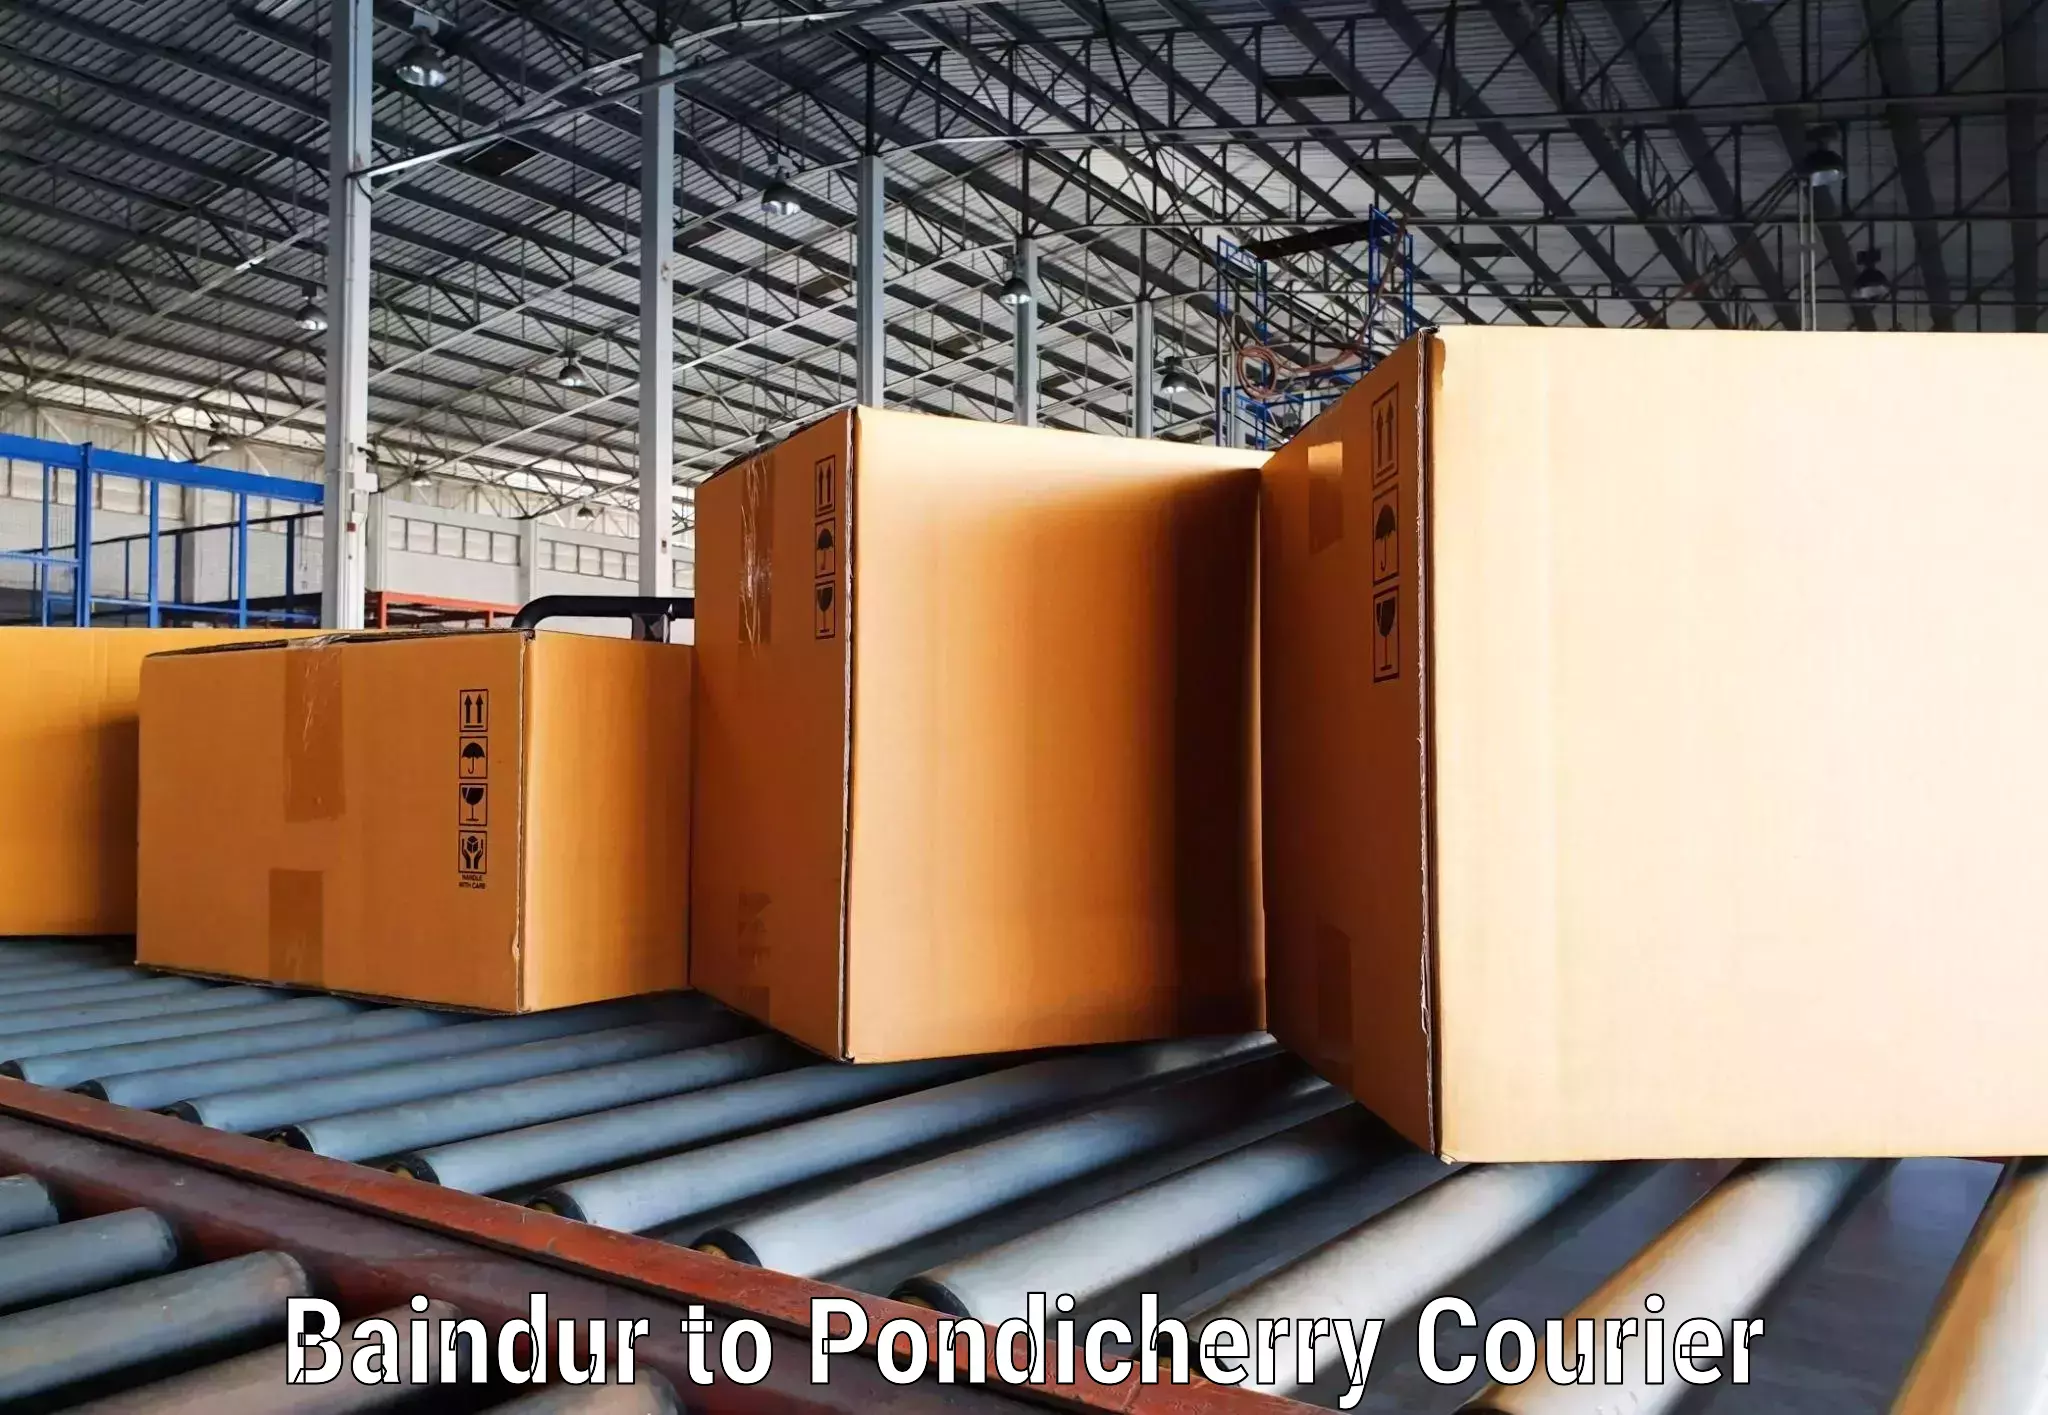 Sustainable shipping practices in Baindur to Pondicherry